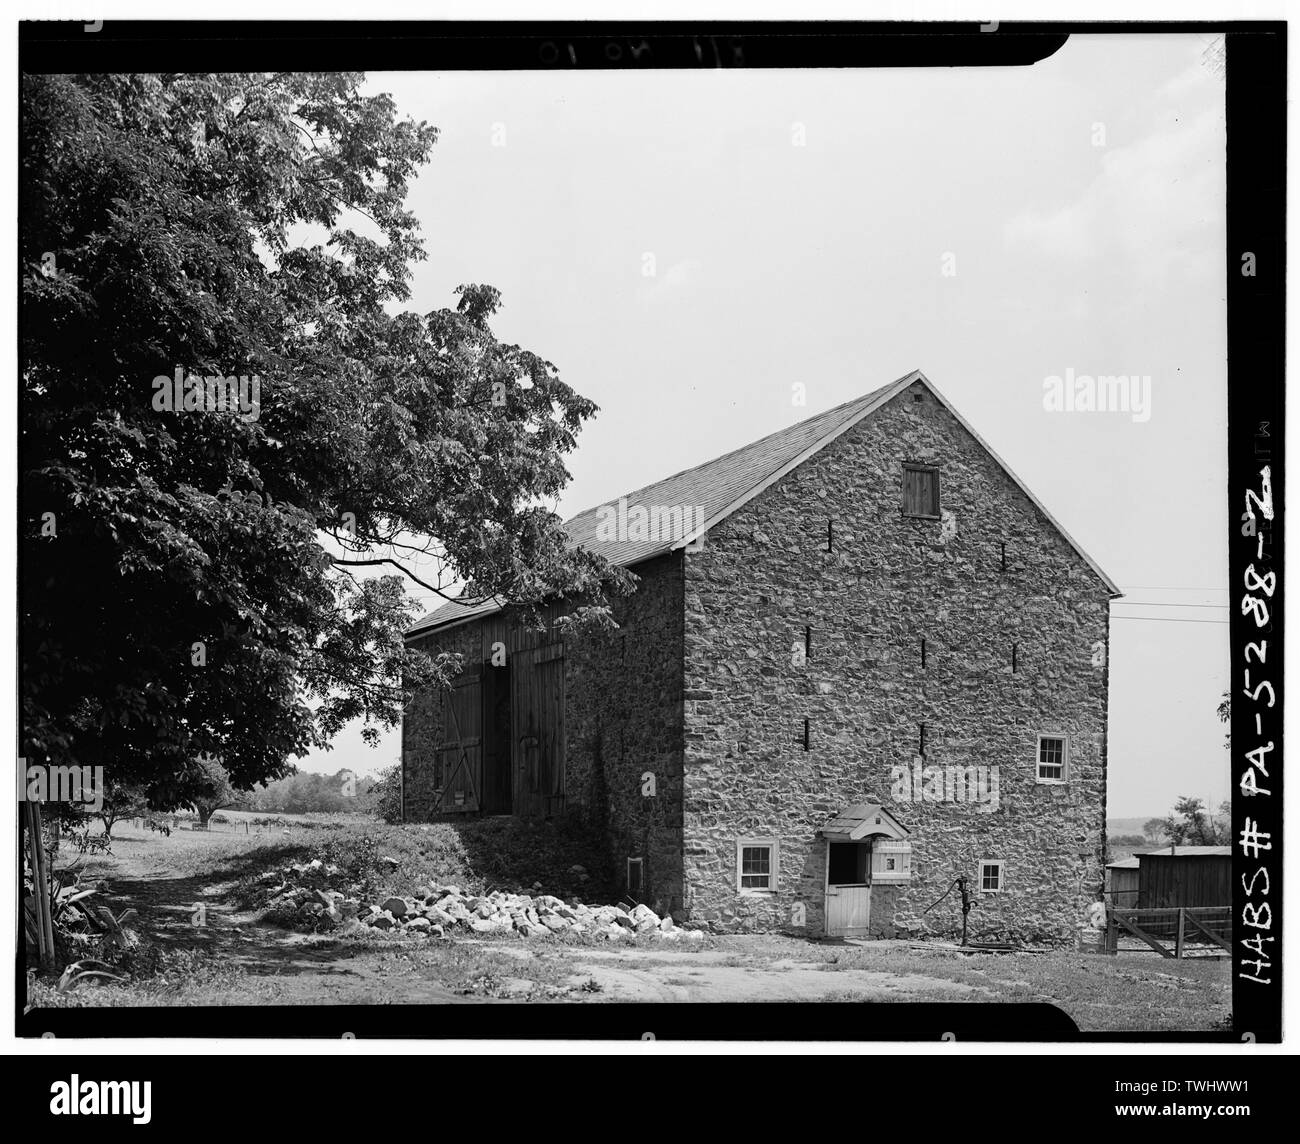 SIDE AND REAR VIEWS. NOTE DOOR HOOD AND VENTILATOR SLITS ON SIDE ELEVATION - Stone Barn (1790), State Route 212 (Springfield Township), Springtown, Bucks County, PA; Dornbusch, Charles H, photographer Stock Photo